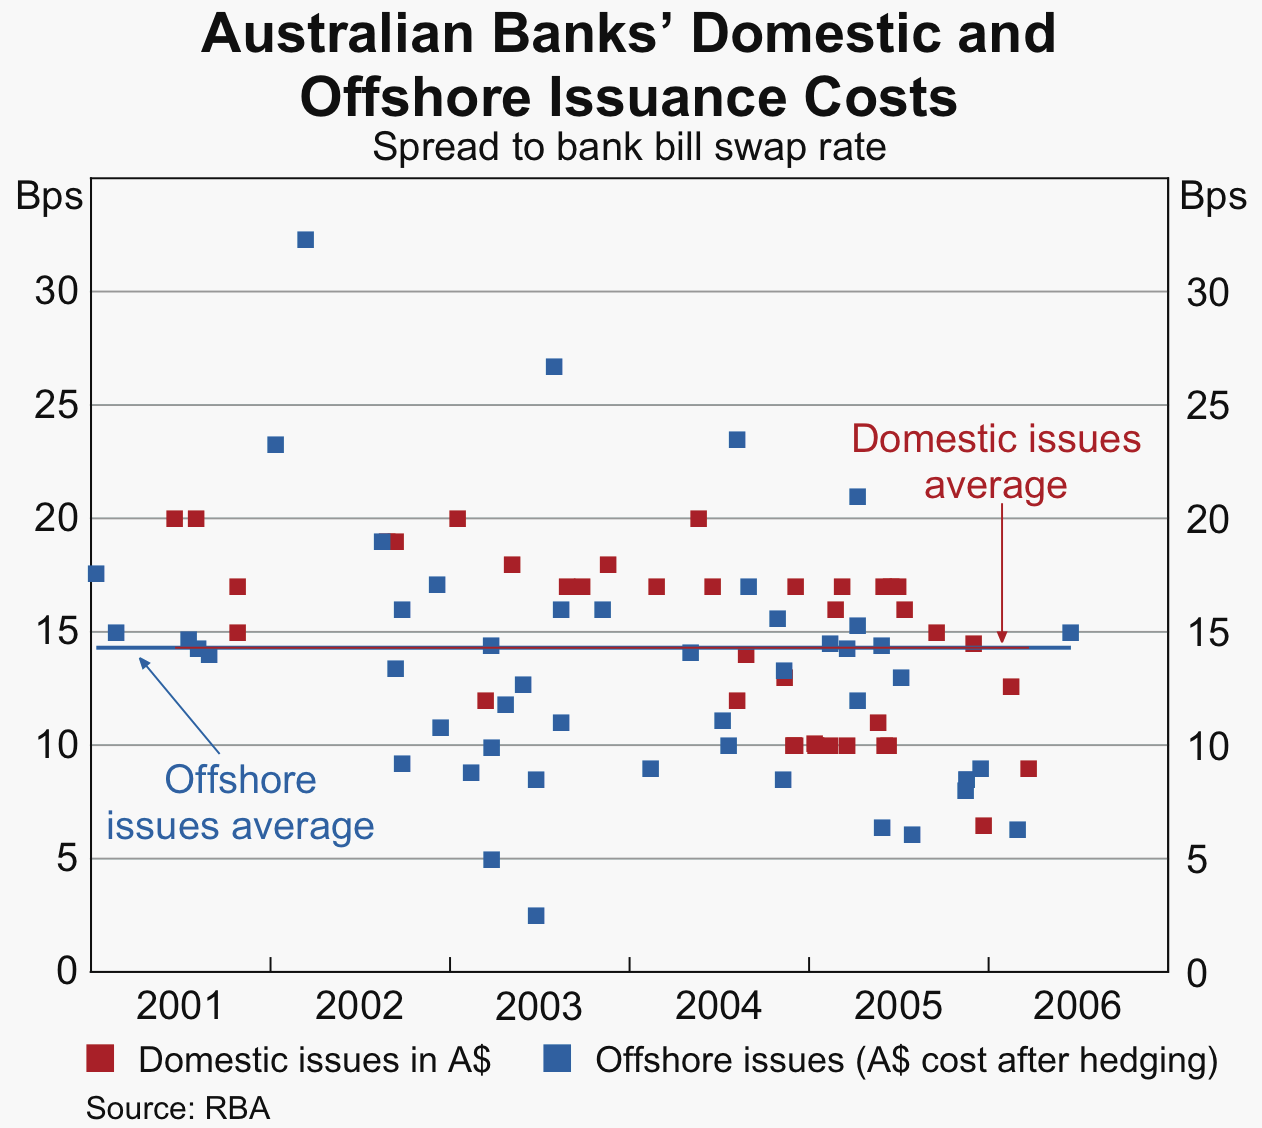 Graph 4: Australian Banks' Domestic and Offshore Issuance Costs